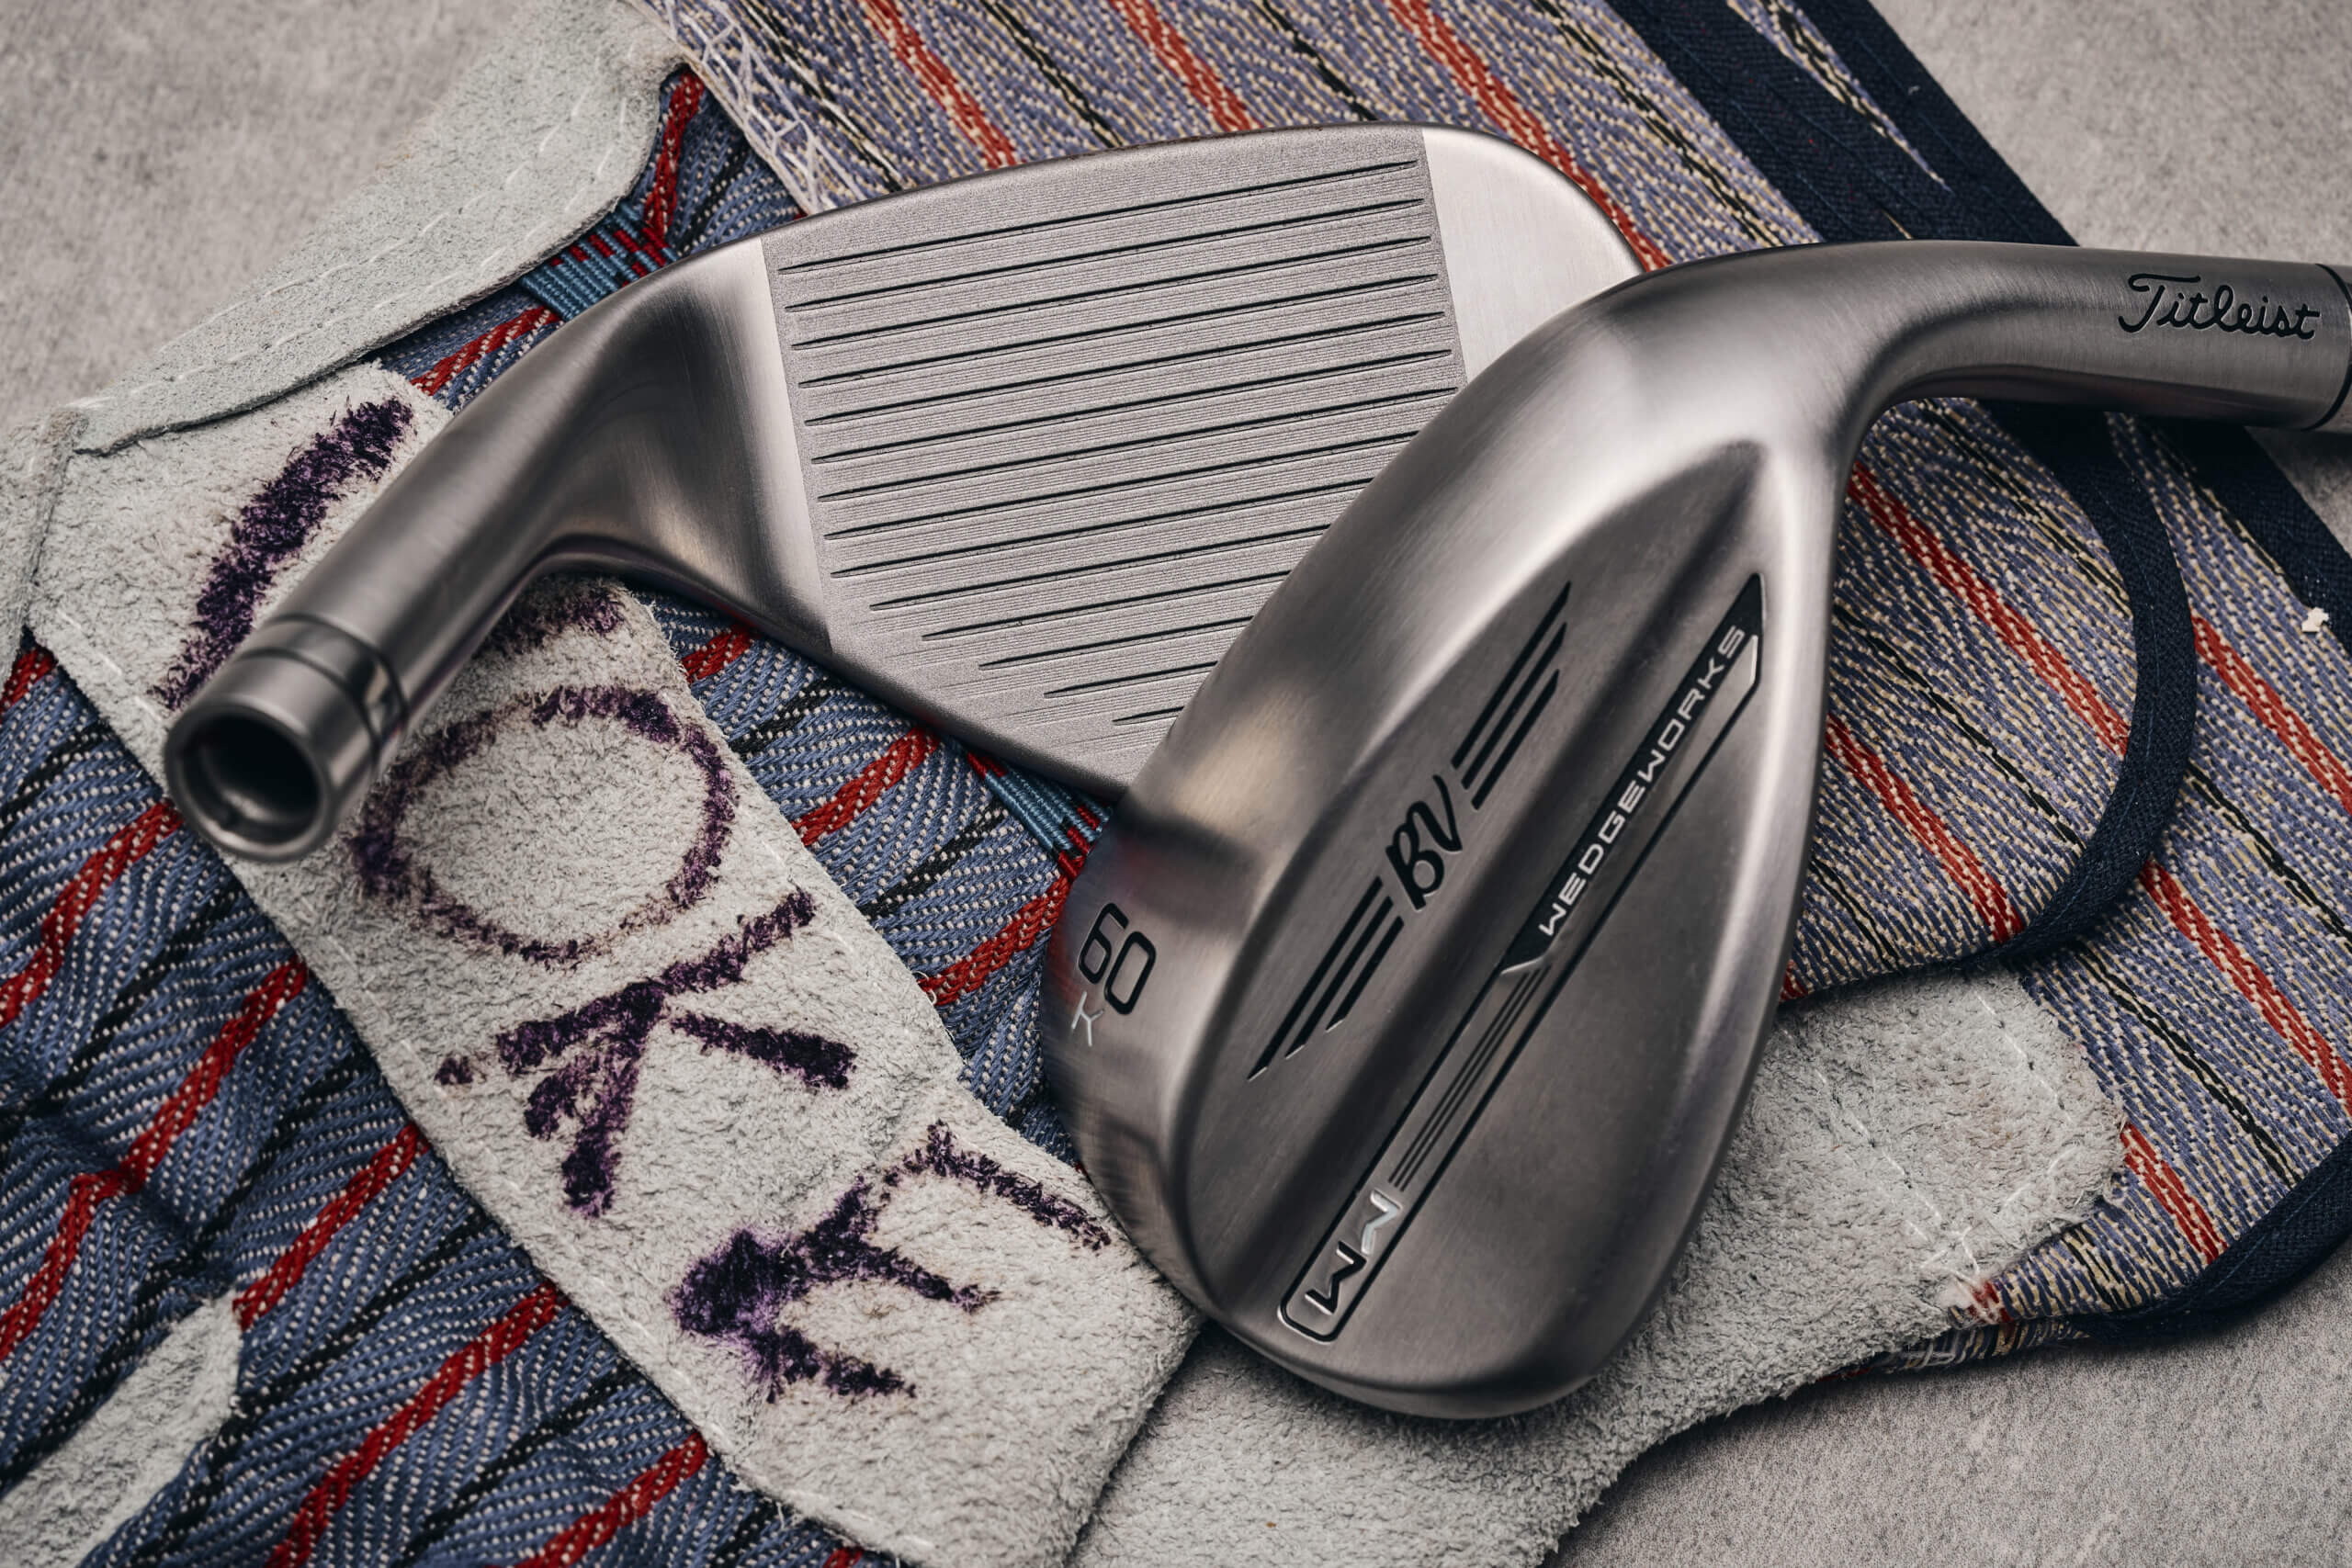 Vokey WedgeWorks Rolls Out Tour-Proven Low Bounce K Grind